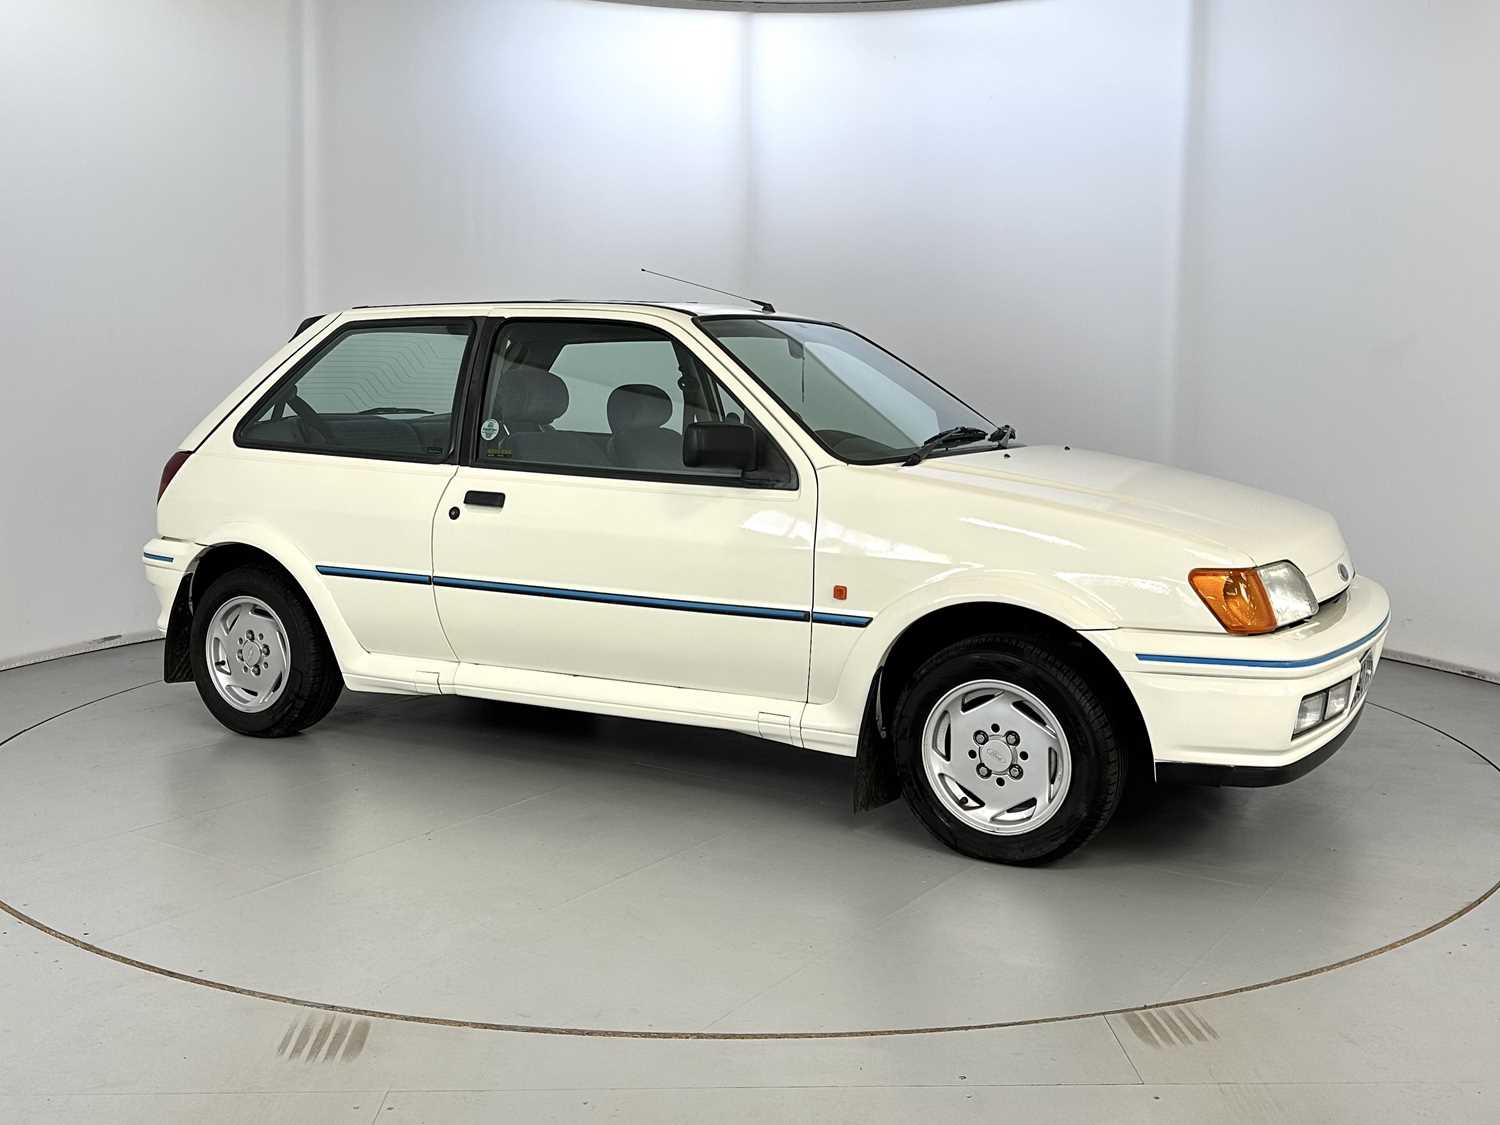 1991 Ford Fiesta XR2i - Image 12 of 30